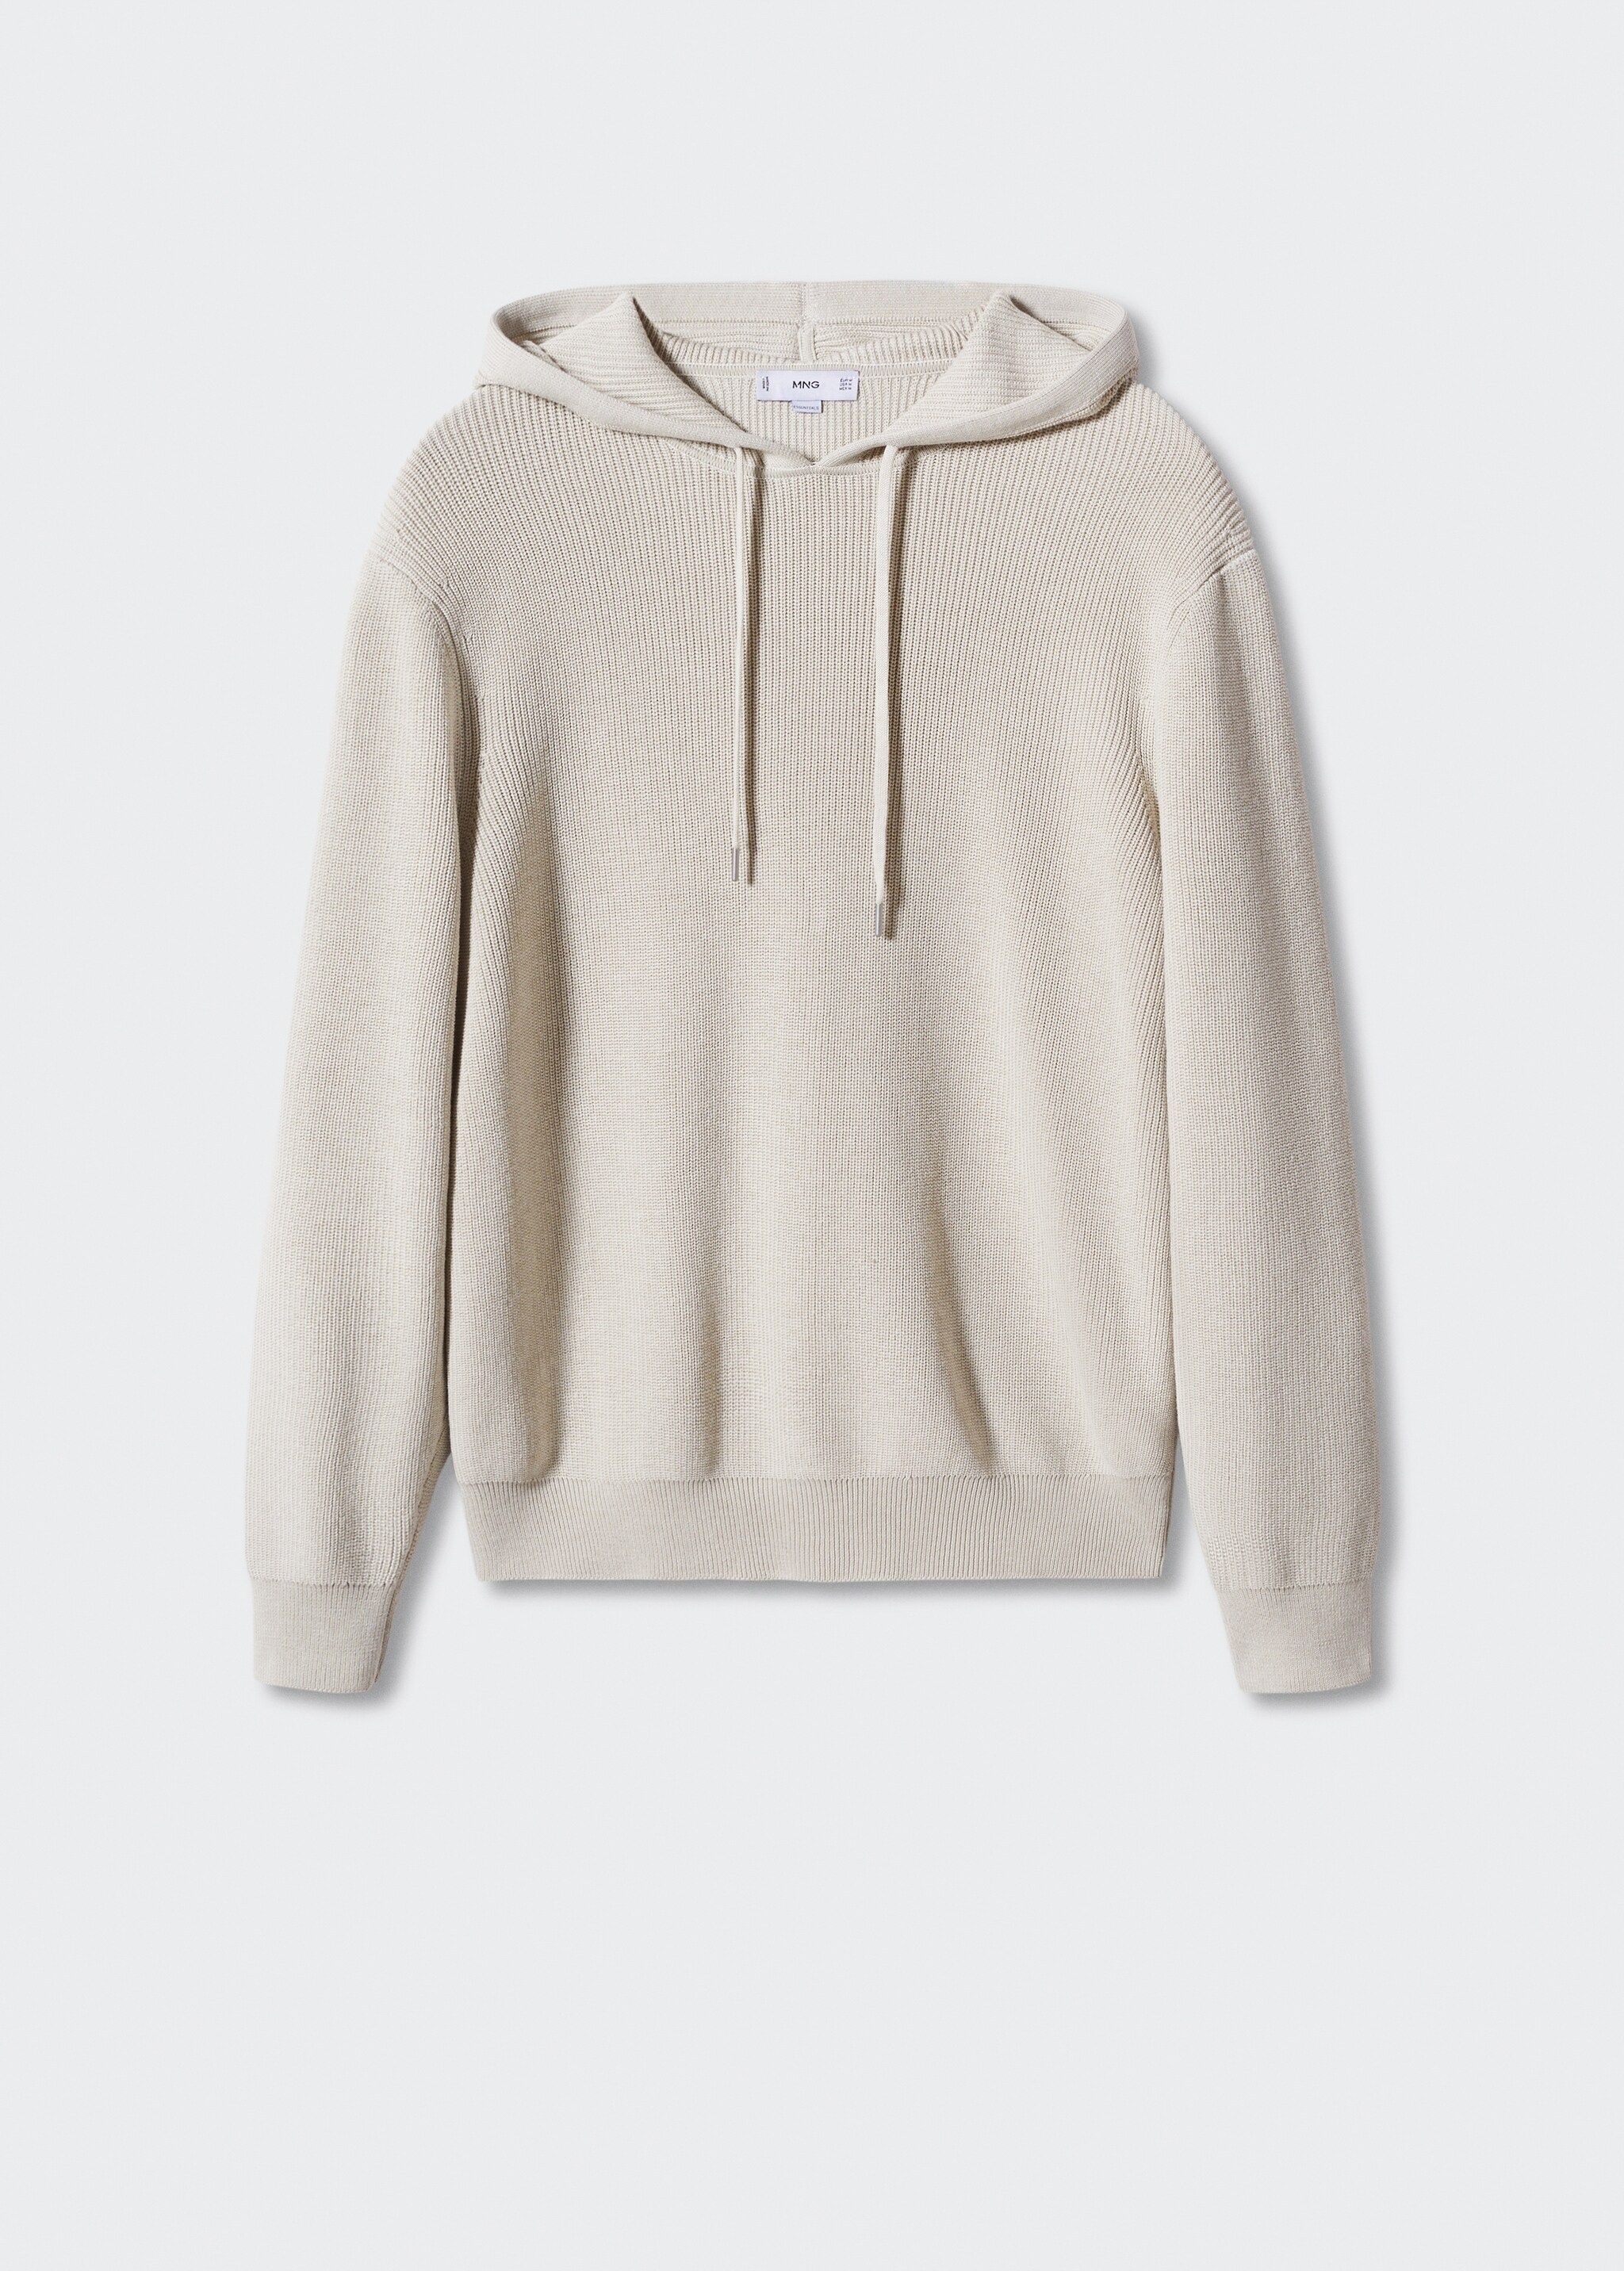 Structured hooded sweater - Article without model